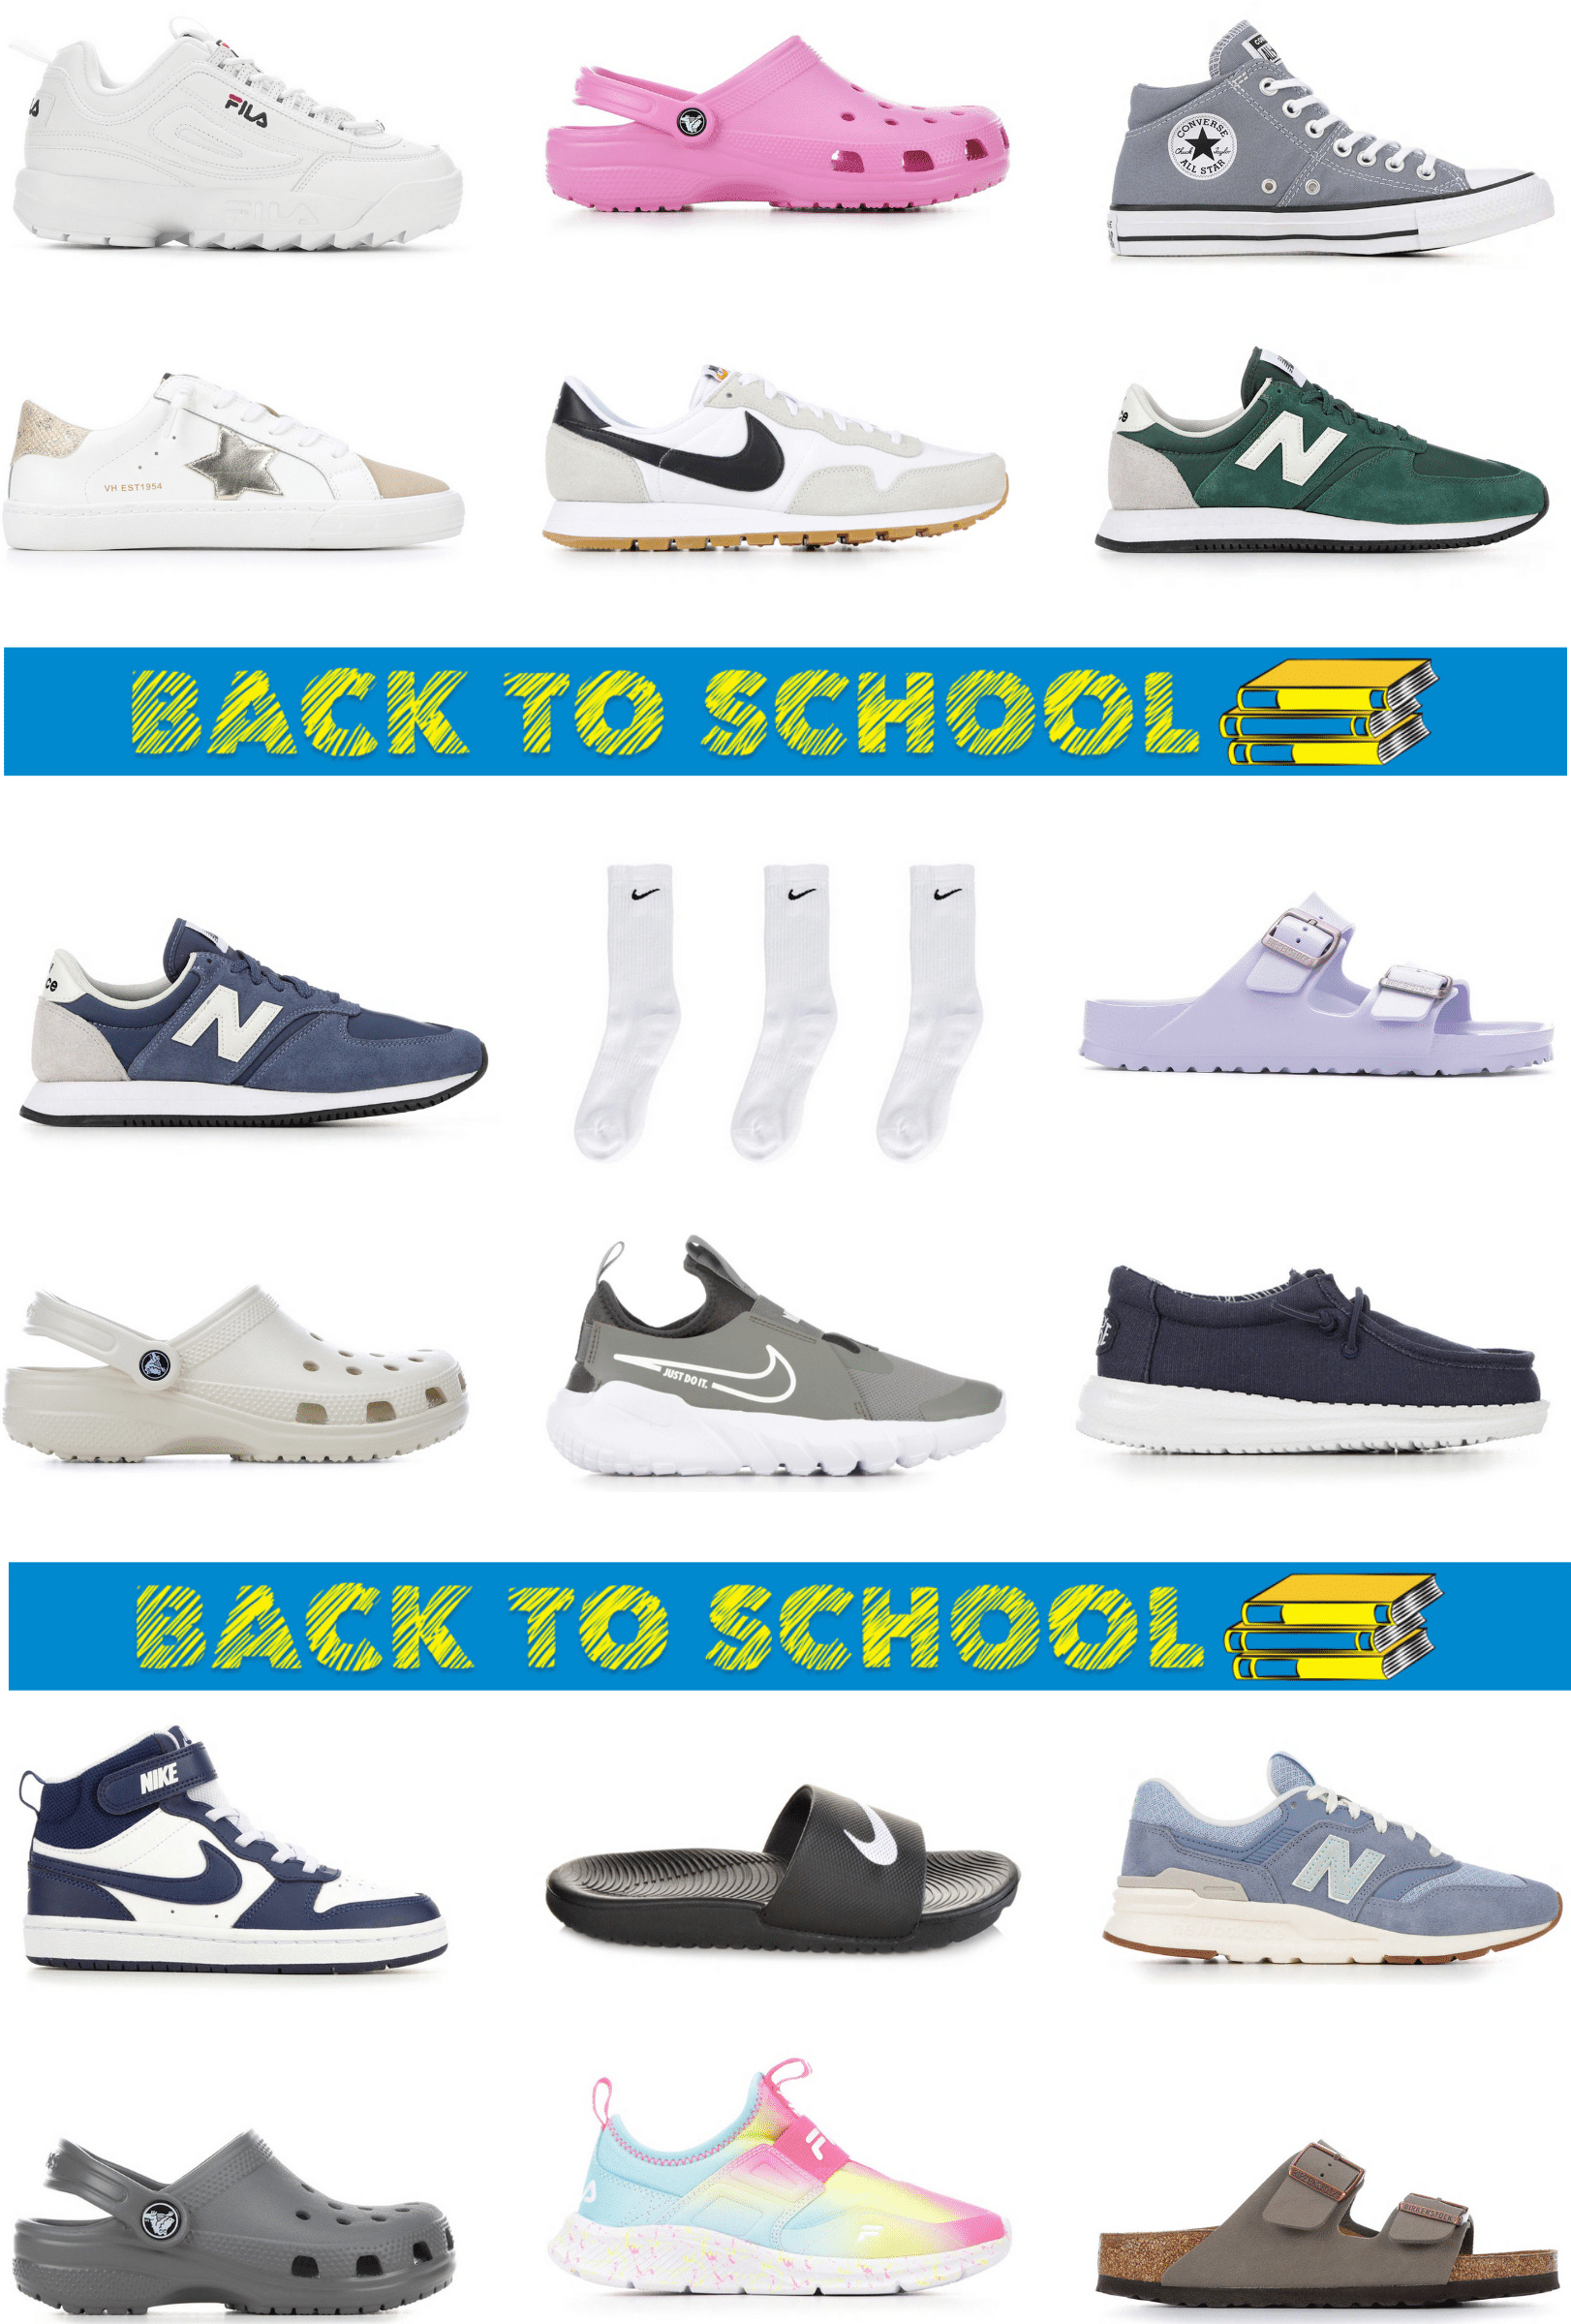 Famous Footwear - Back to school is such a special time for us